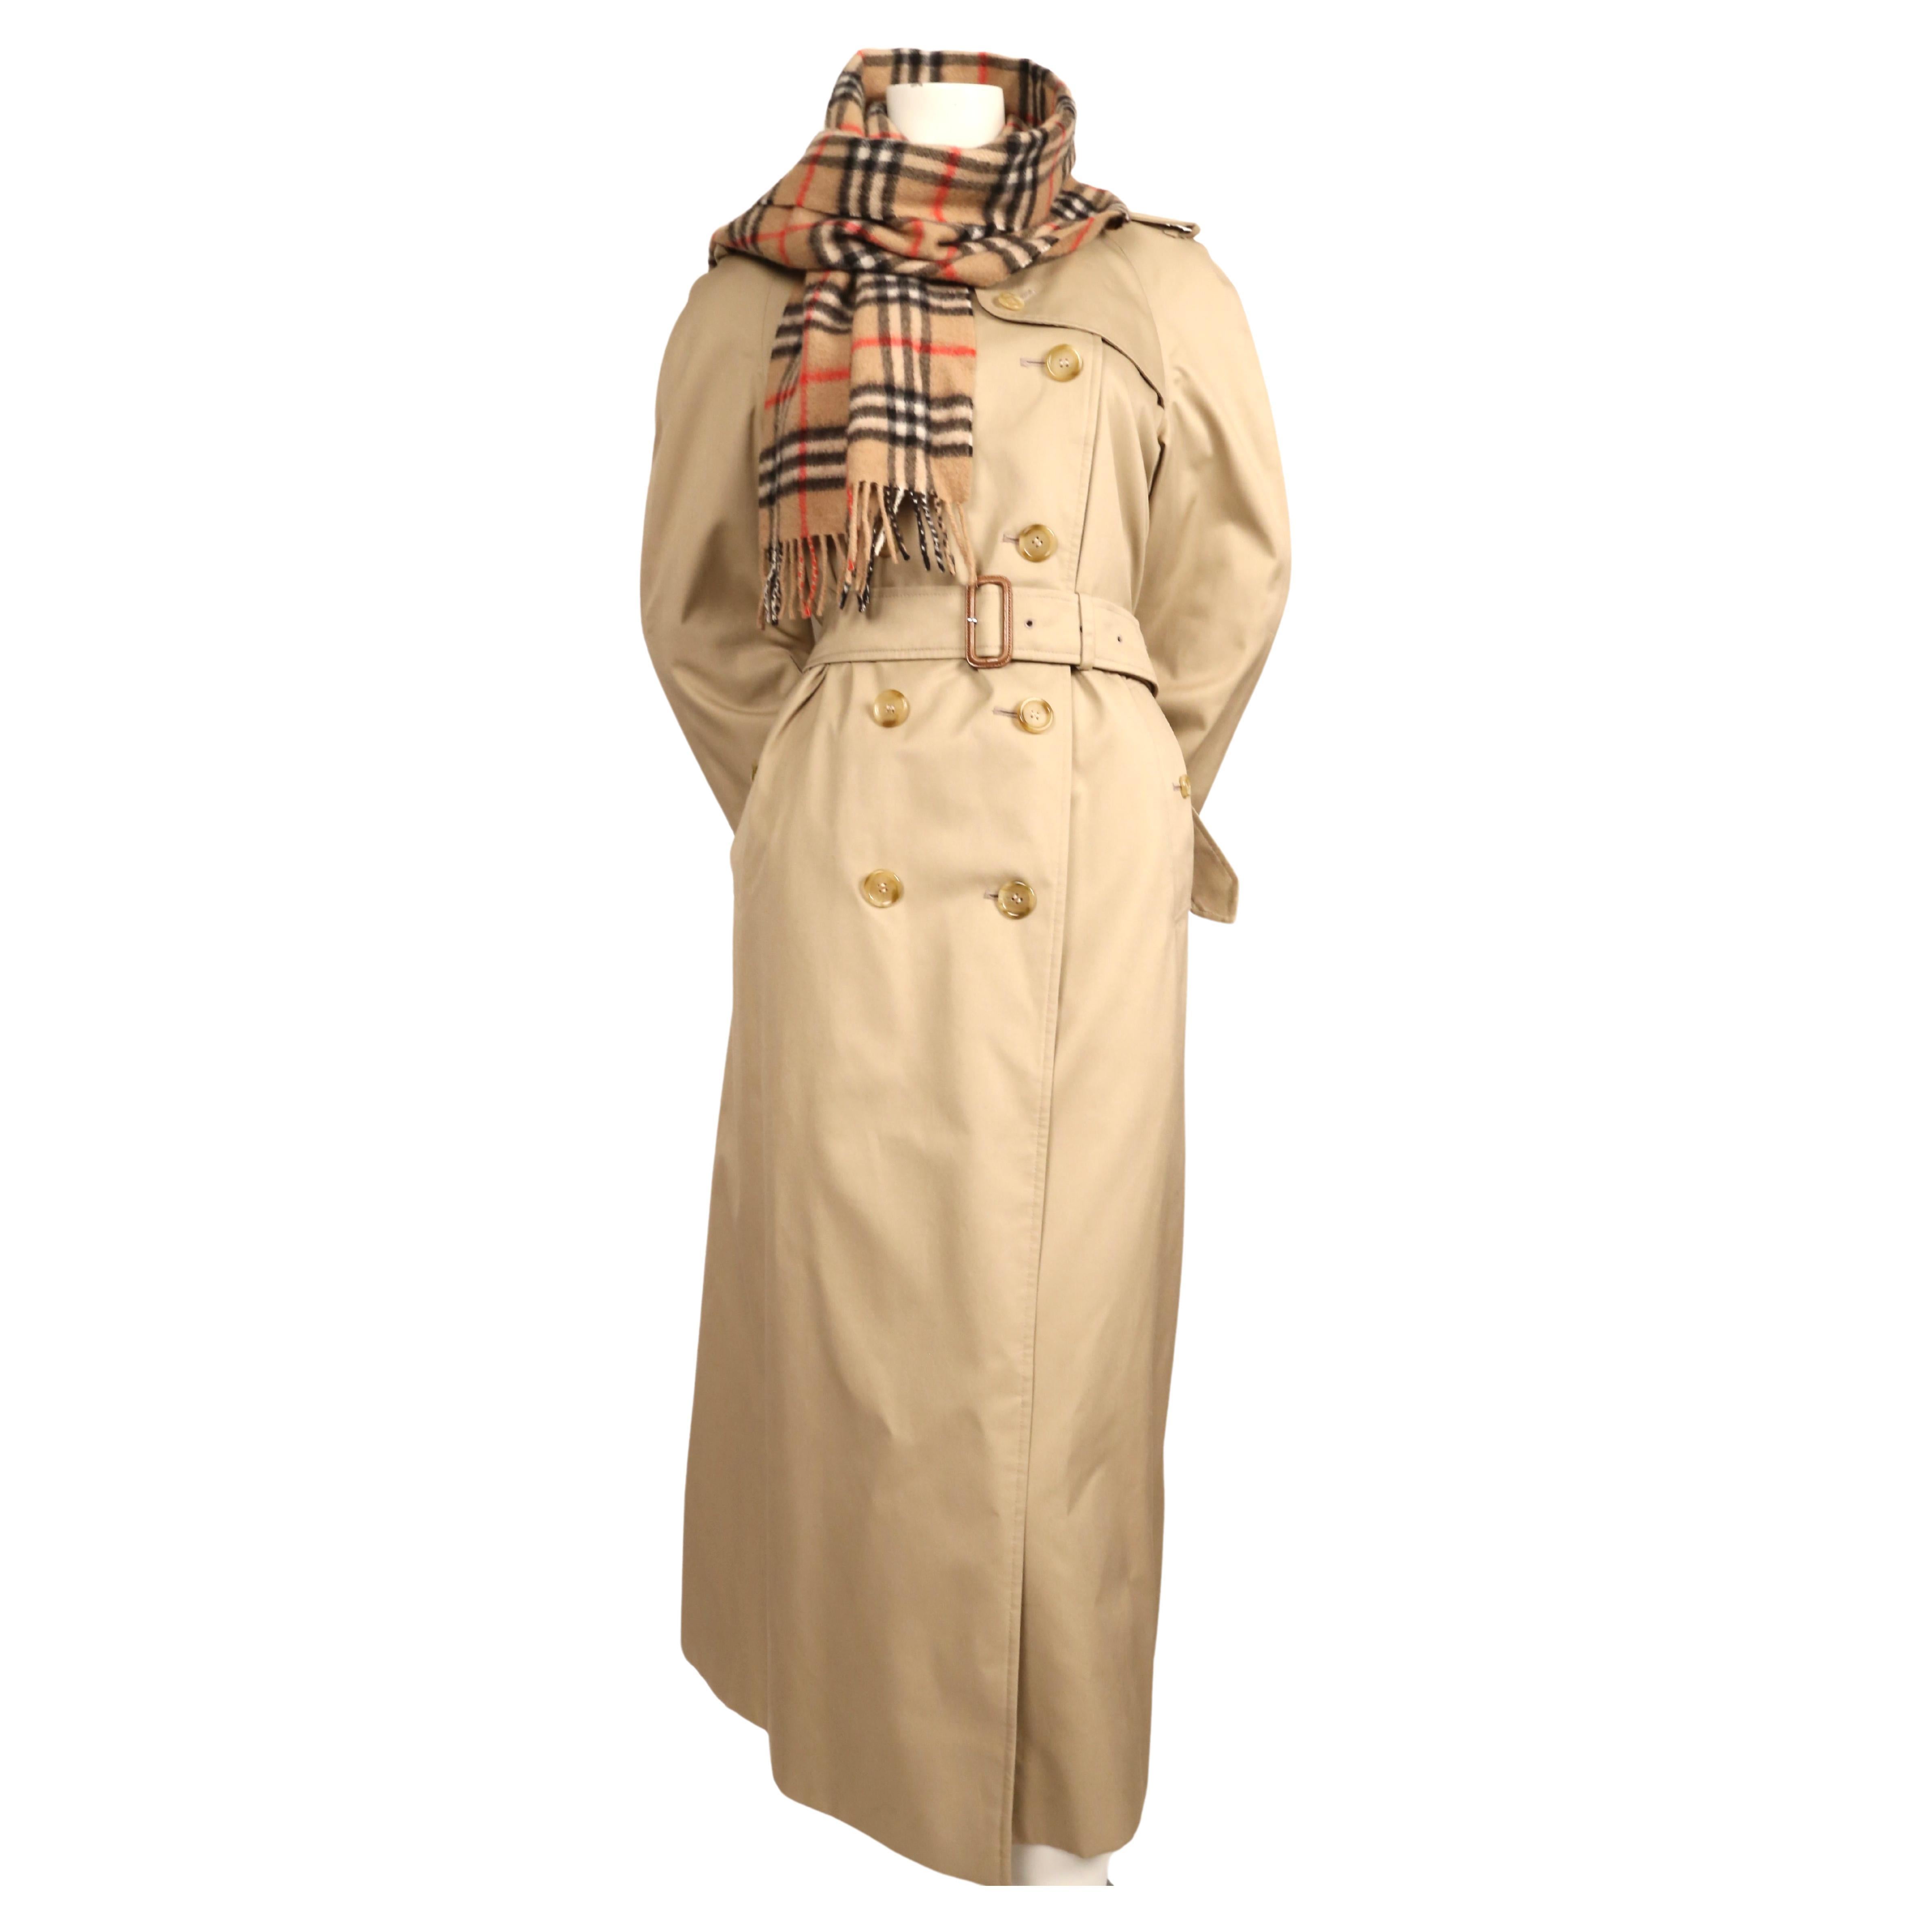 Classic, tan gabardine trench with matching nova check cashmere scarf from Burberry's dating to the 1980's. Trench has inner zip out wool liner. Labeled a size '10 extra-long'.  Approximate measurements: bust 42